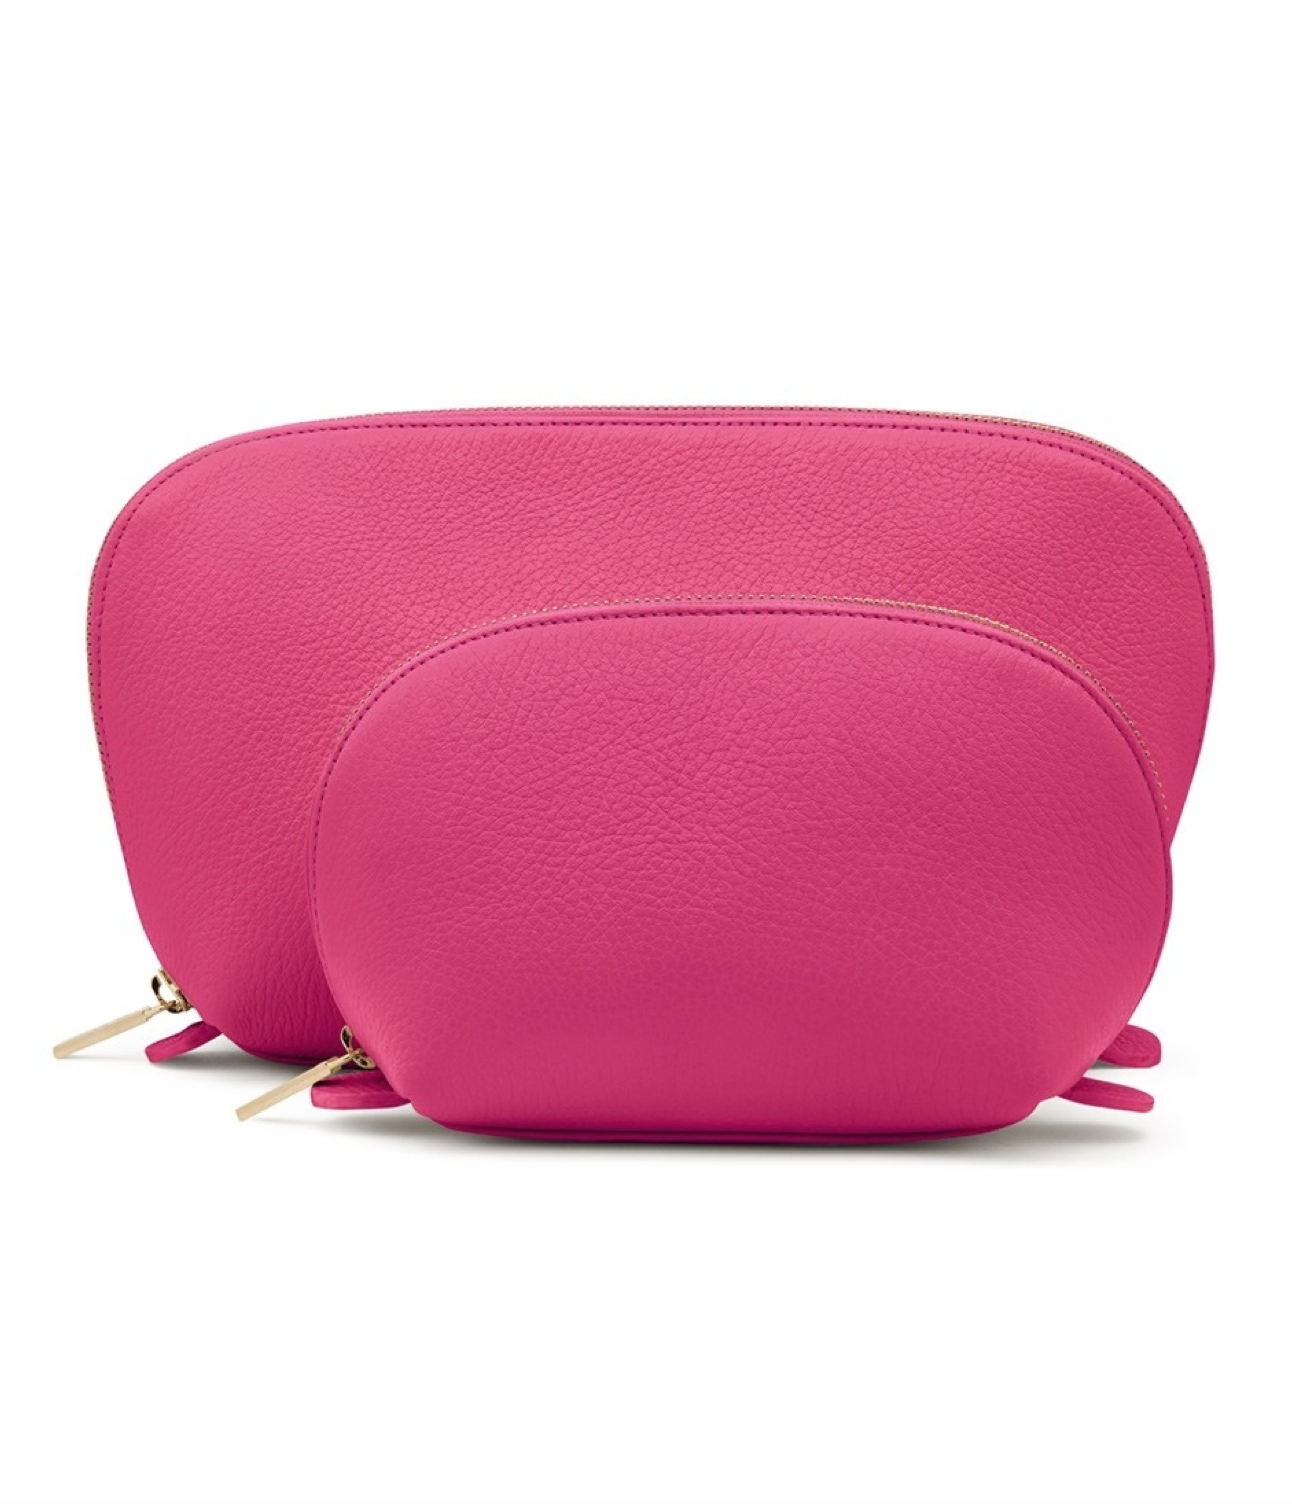 Pink Leather Travel Case